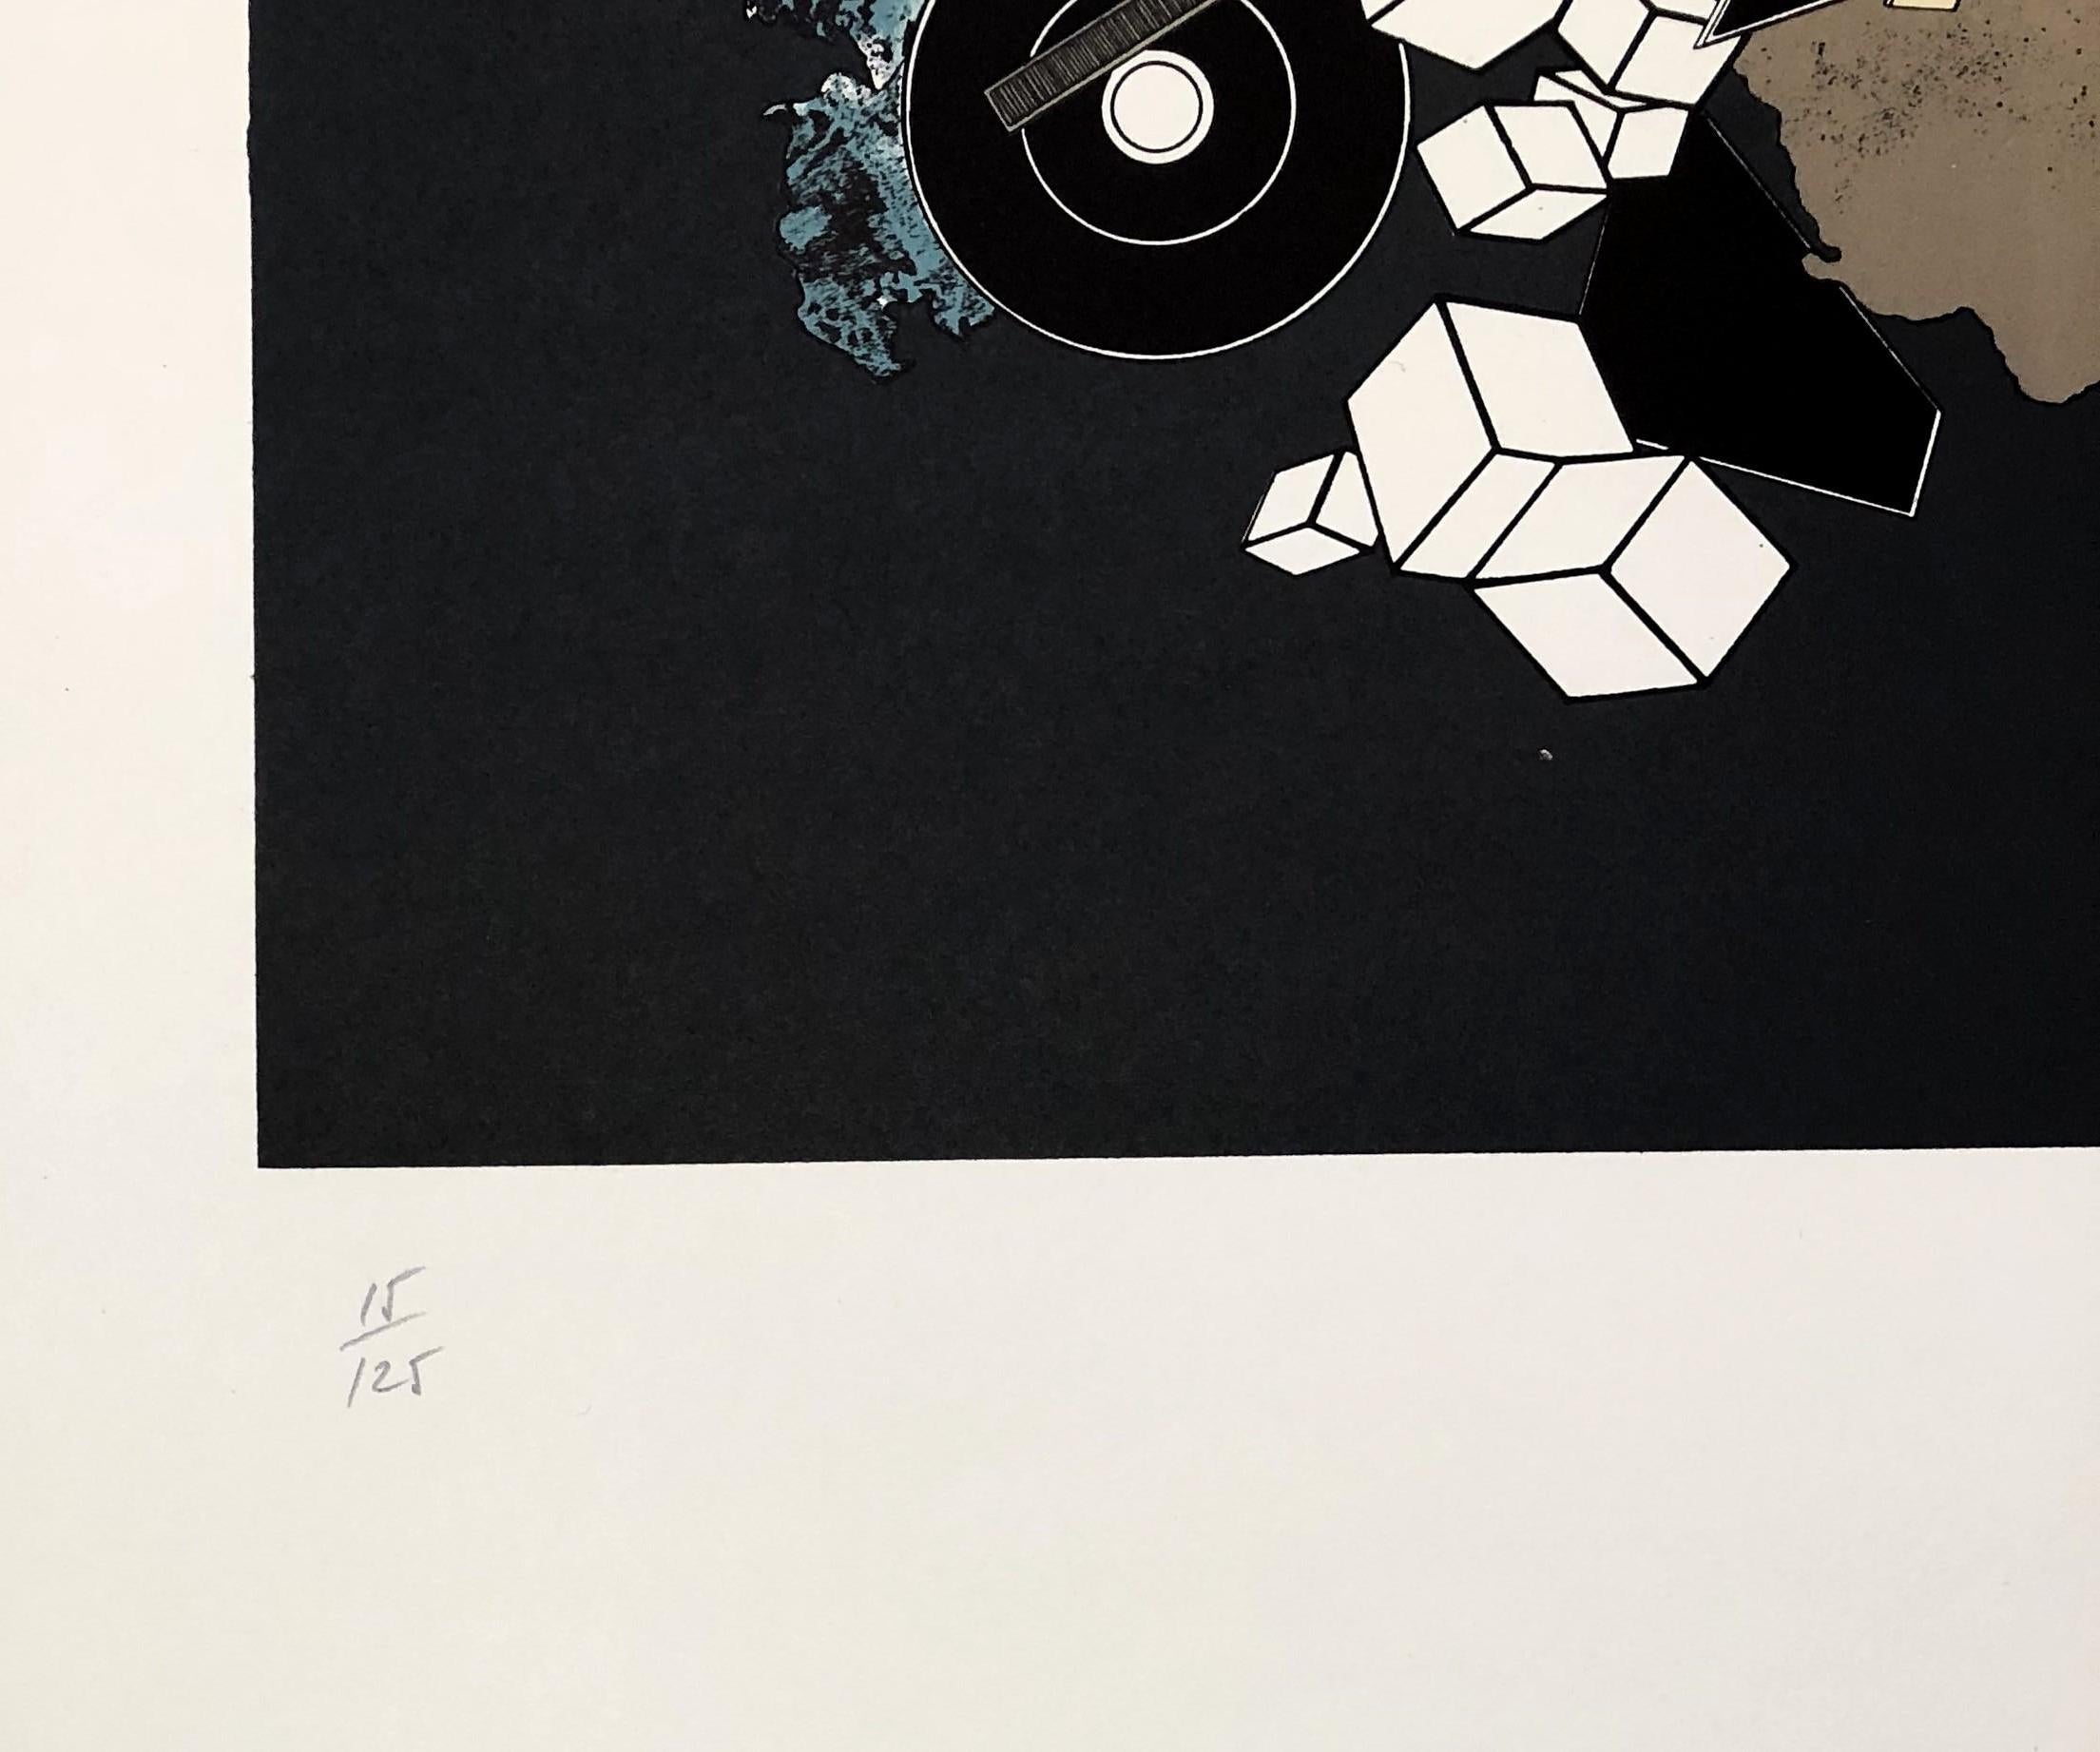 Geometric Composition VIII - Original Lithograph Handsigned - 125 copies - Black Abstract Print by Alain Le Yaouanc